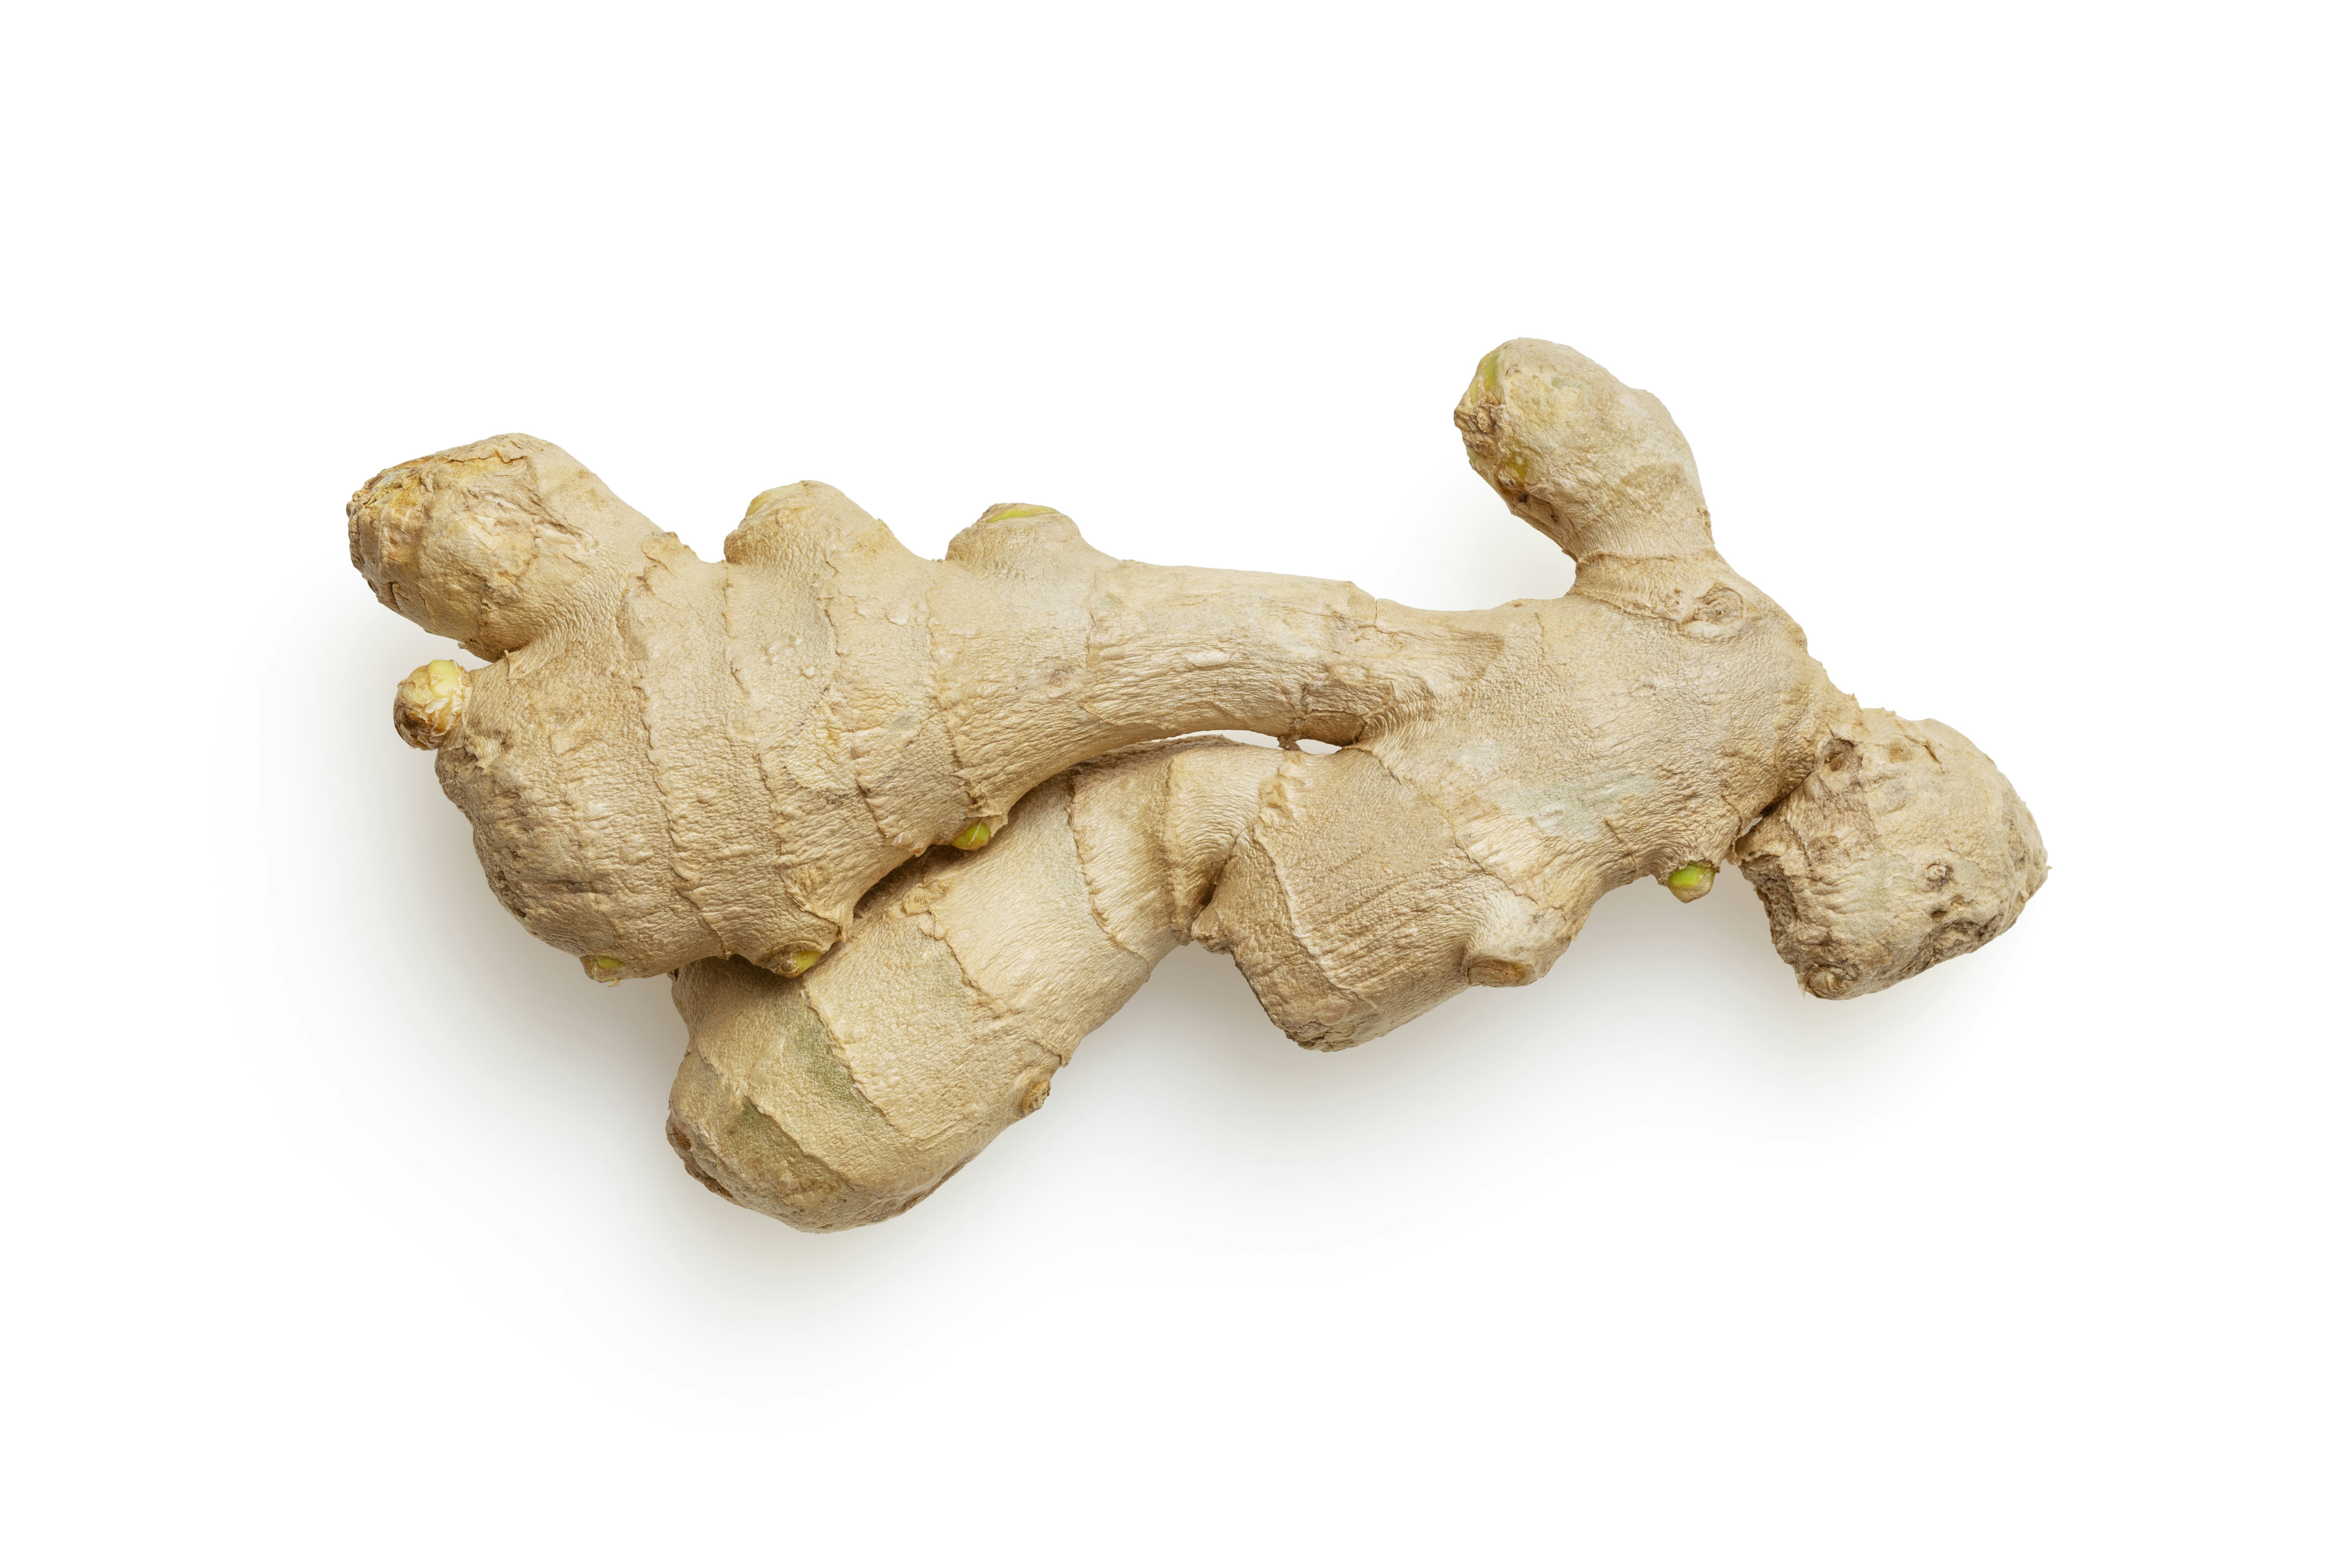 Ginger Health Benefits And Side Effects: Uses, And More